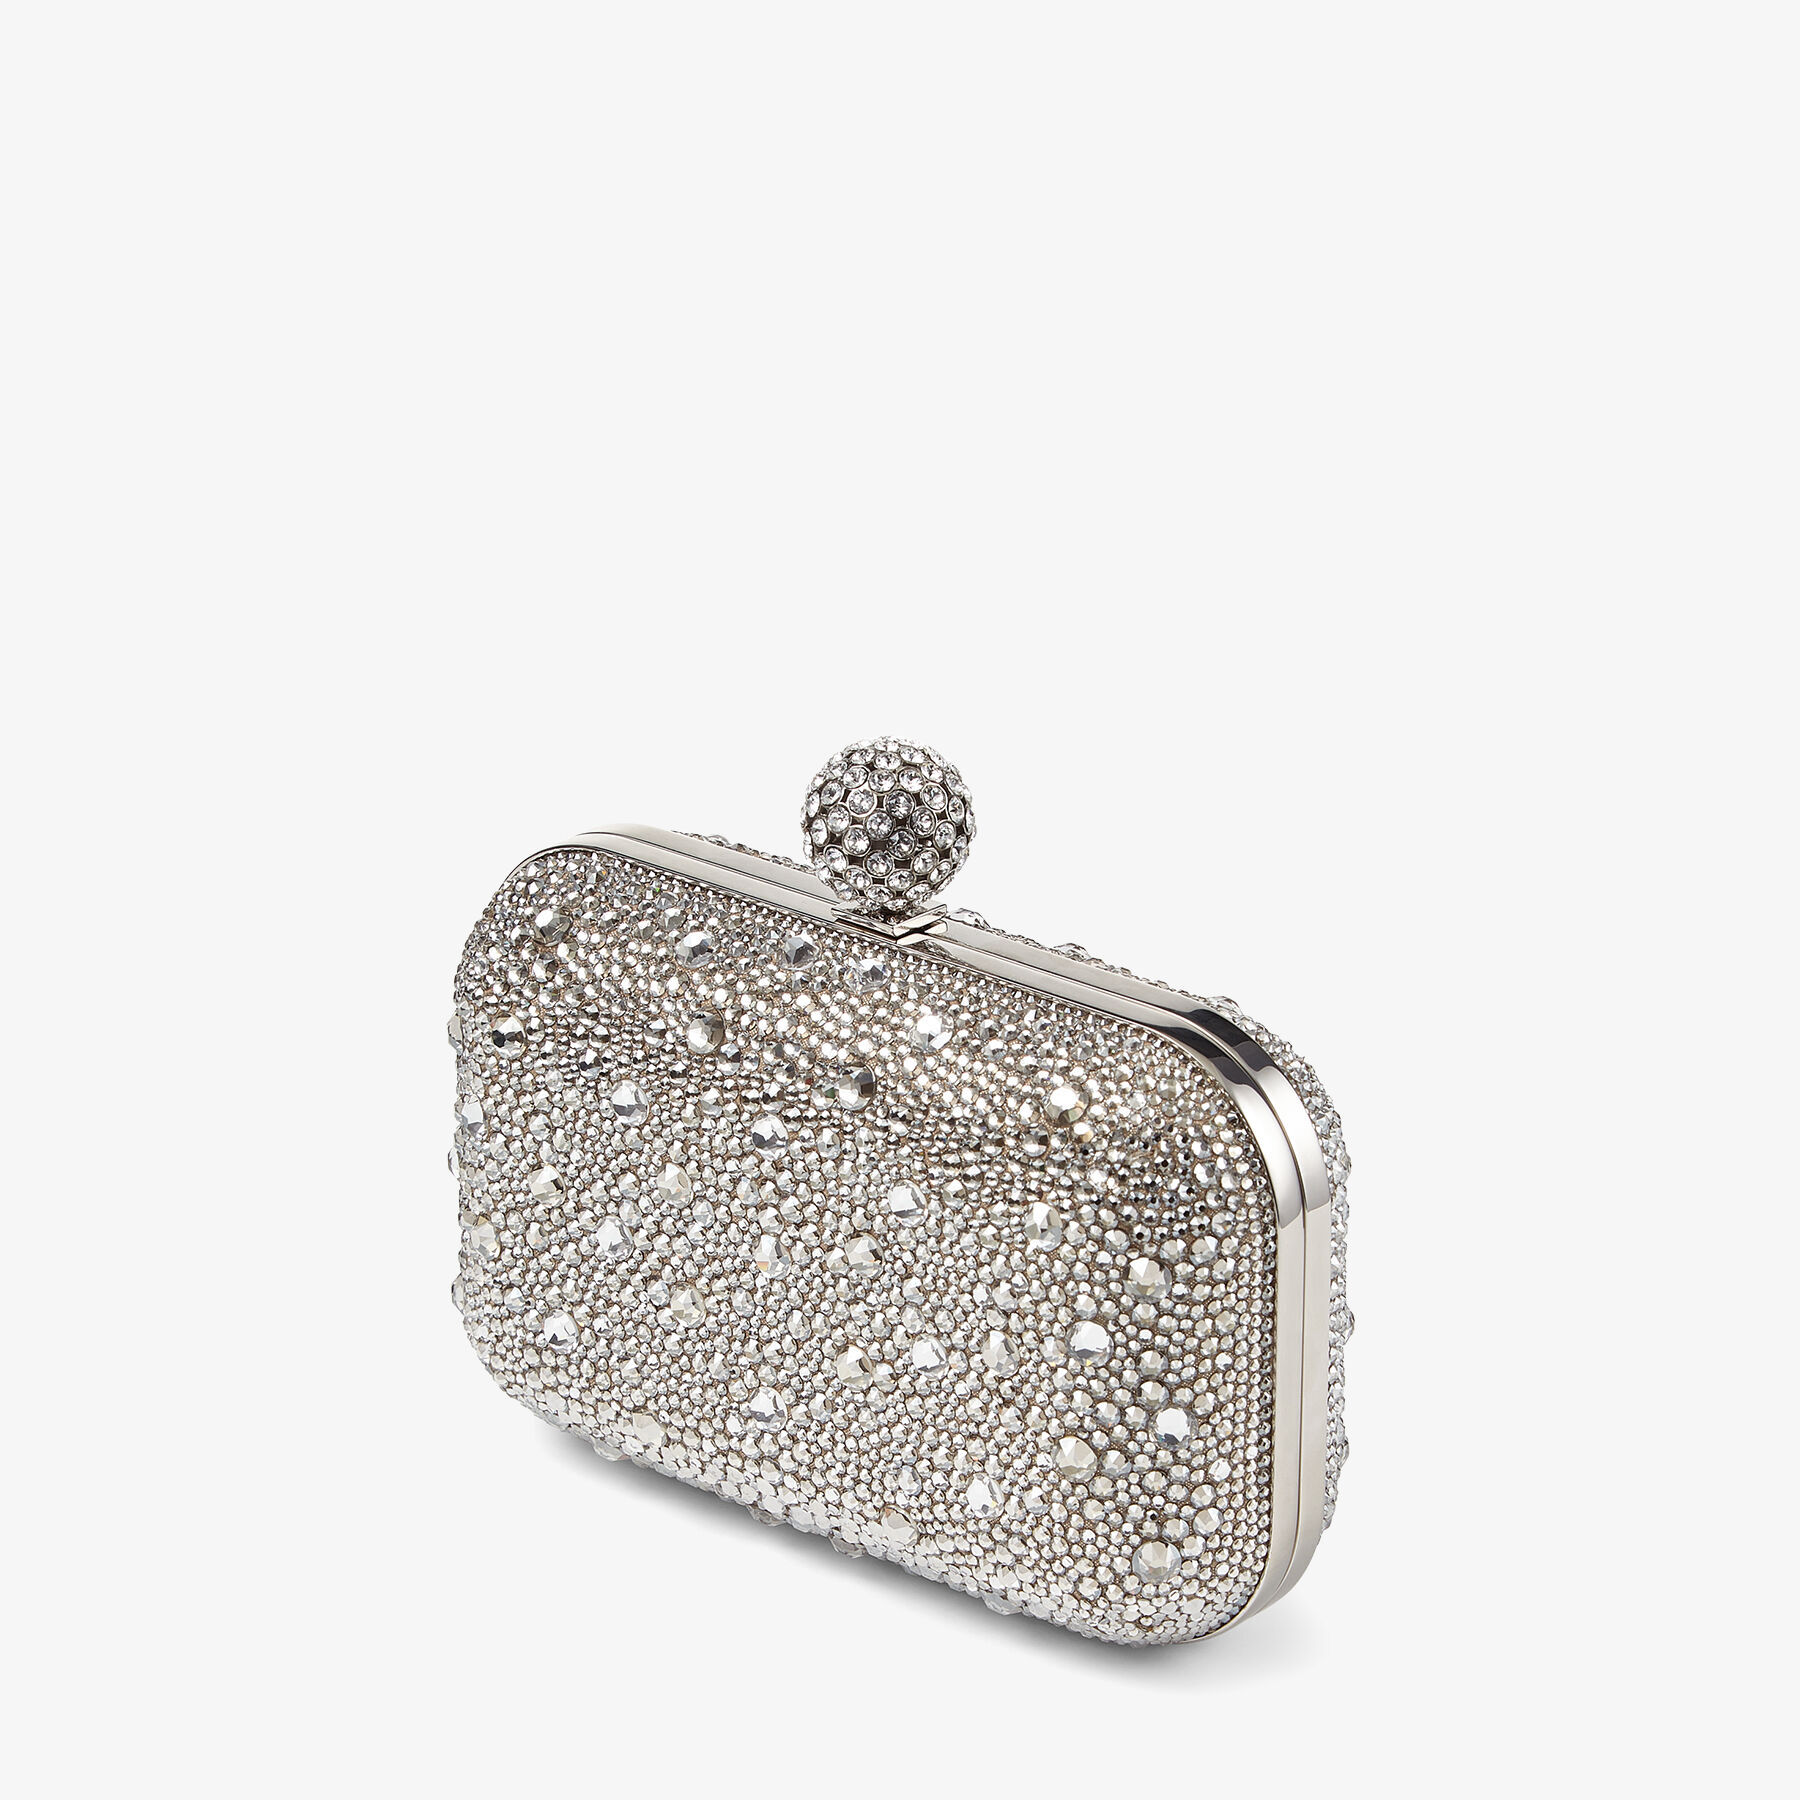 Nude Shimmer Suede Clutch Bag with Hotfix and Crystal-Encrusted 